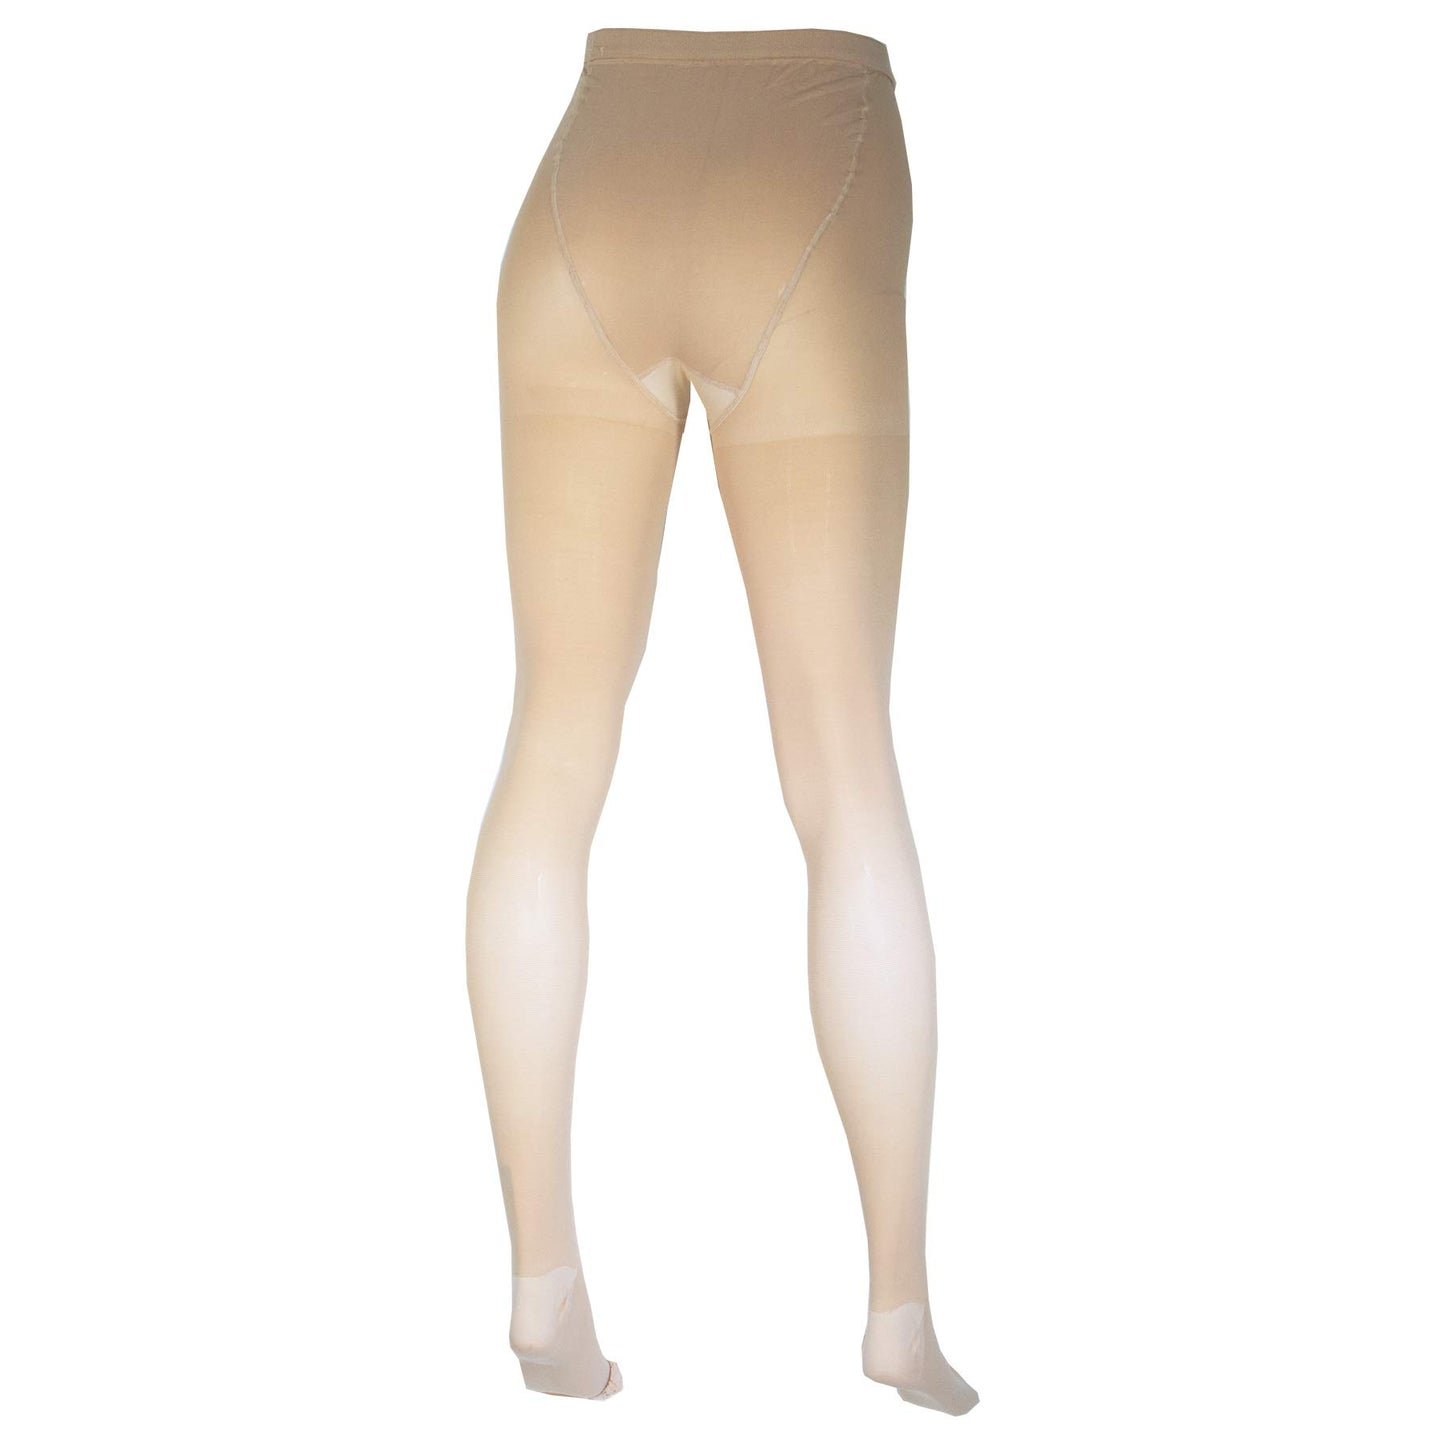 Plus Size Medical Compression Tights Pantyhose(15-20mmhg)